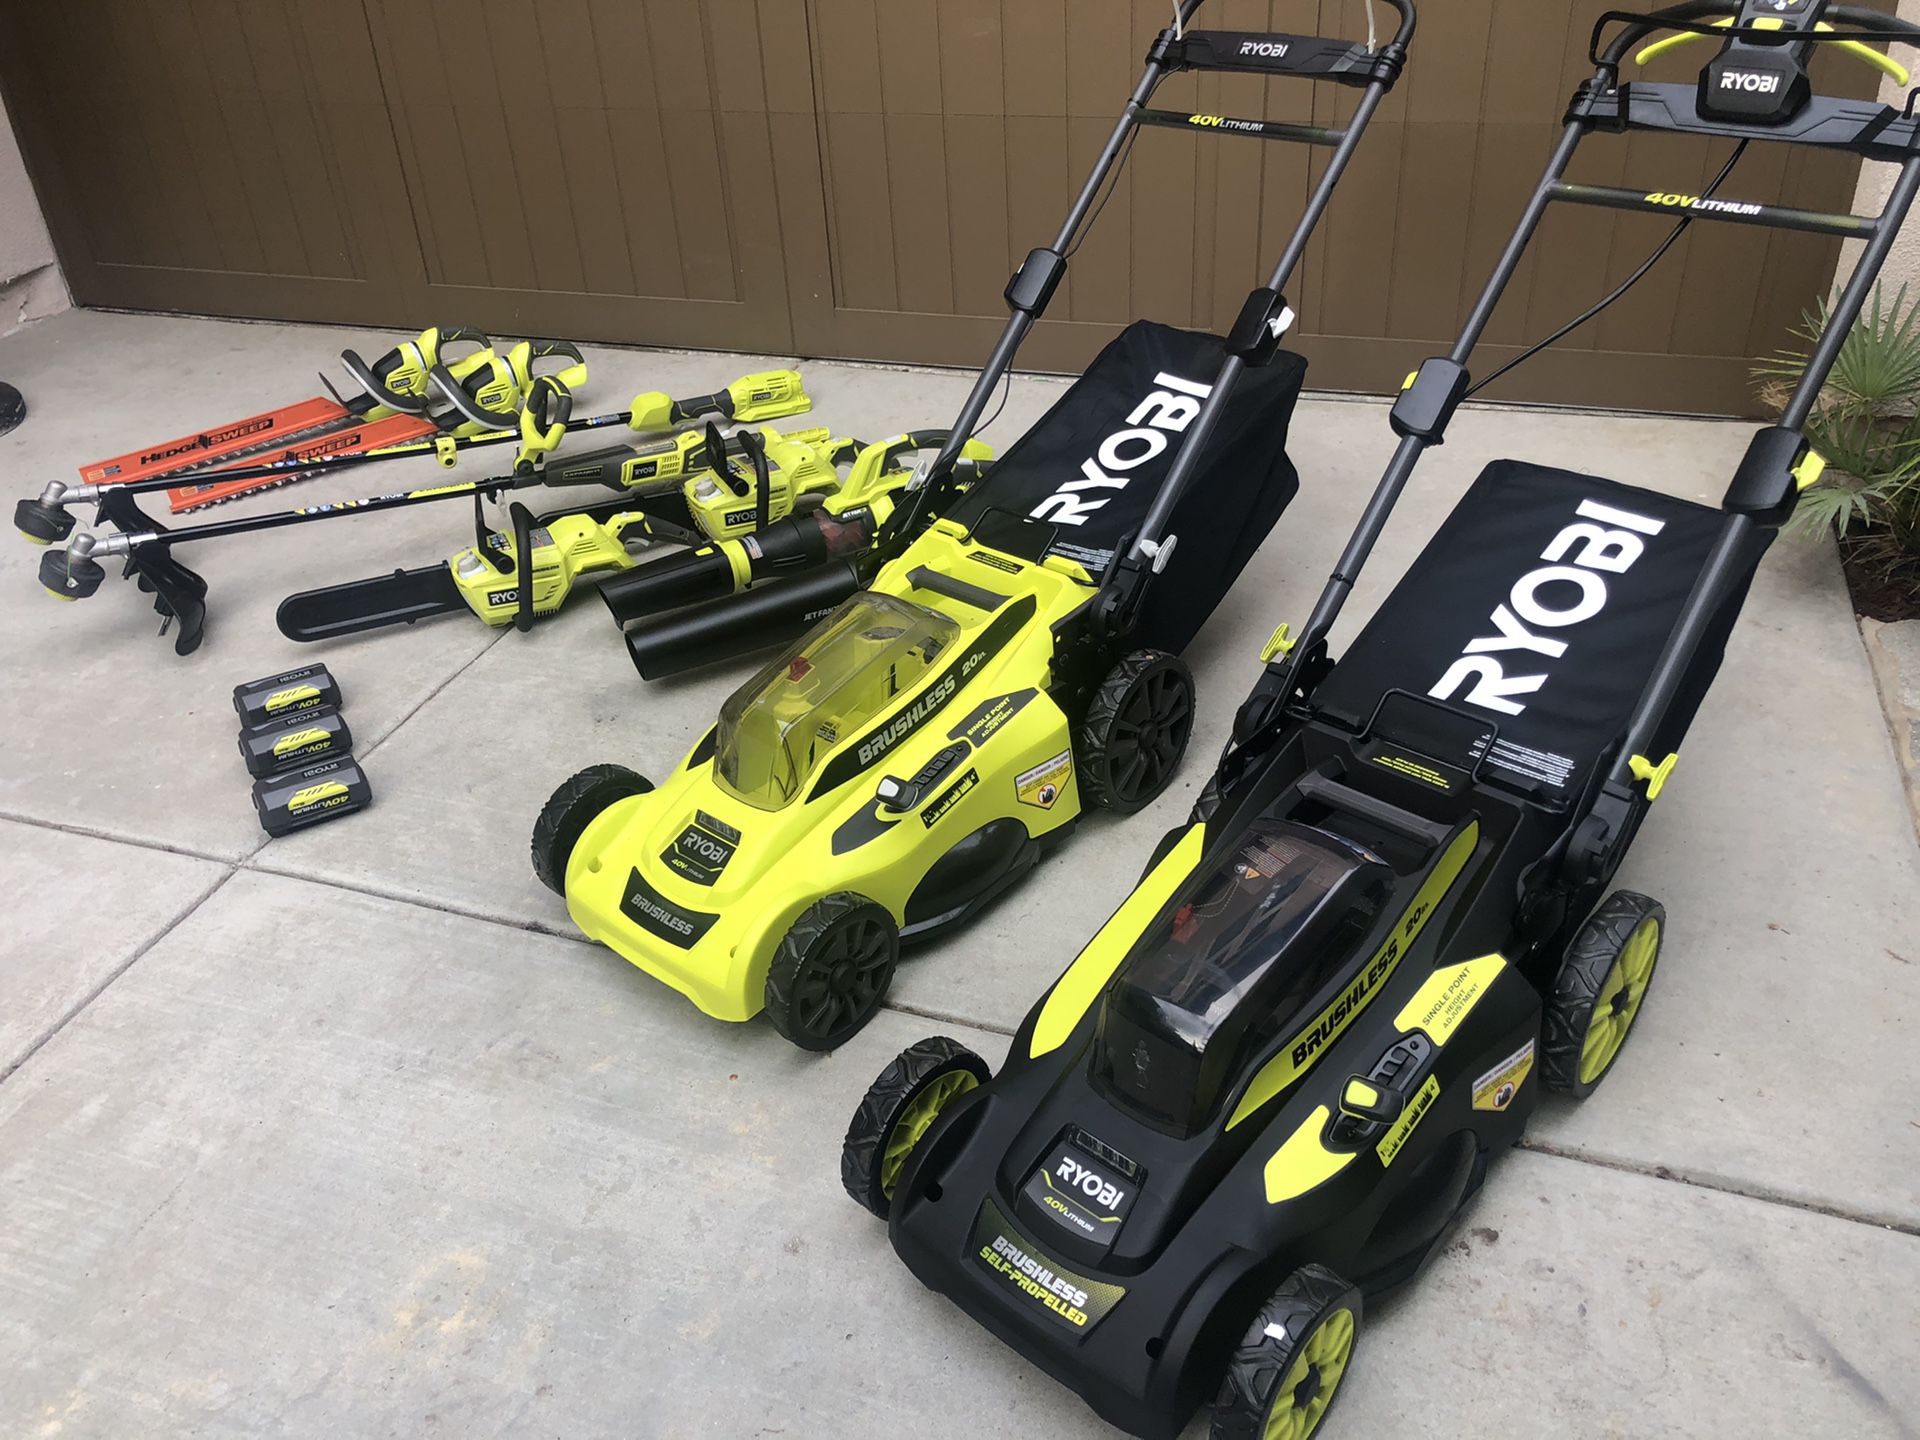 Ryobi 40V cordless lawn mower,weed eater,hedge trimmer,leaf vac,chainsaw,blower,NEW!